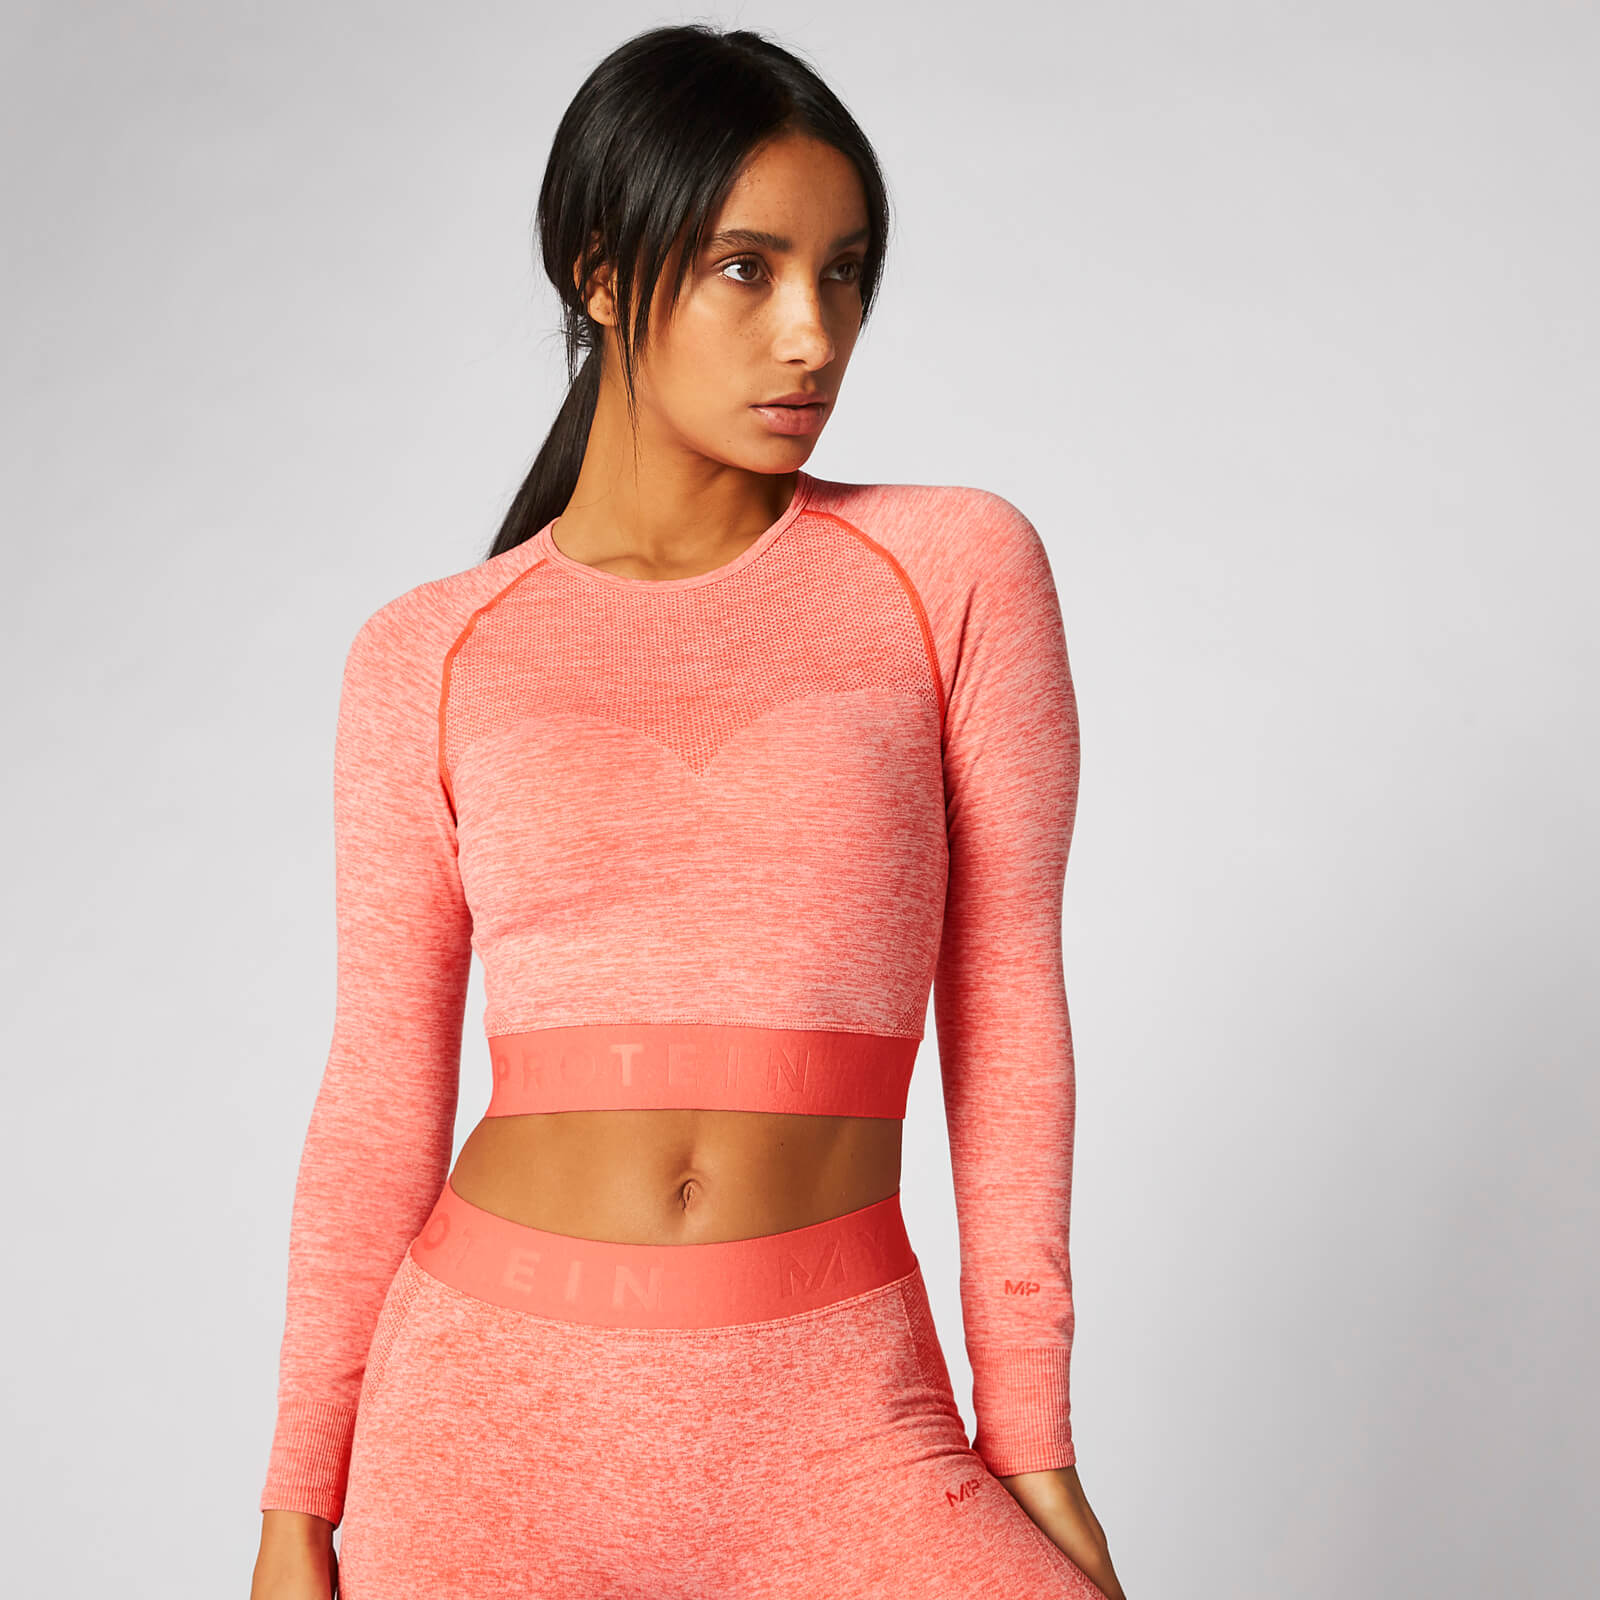 MP Inspire Seamless Crop Top - Hot Coral - M